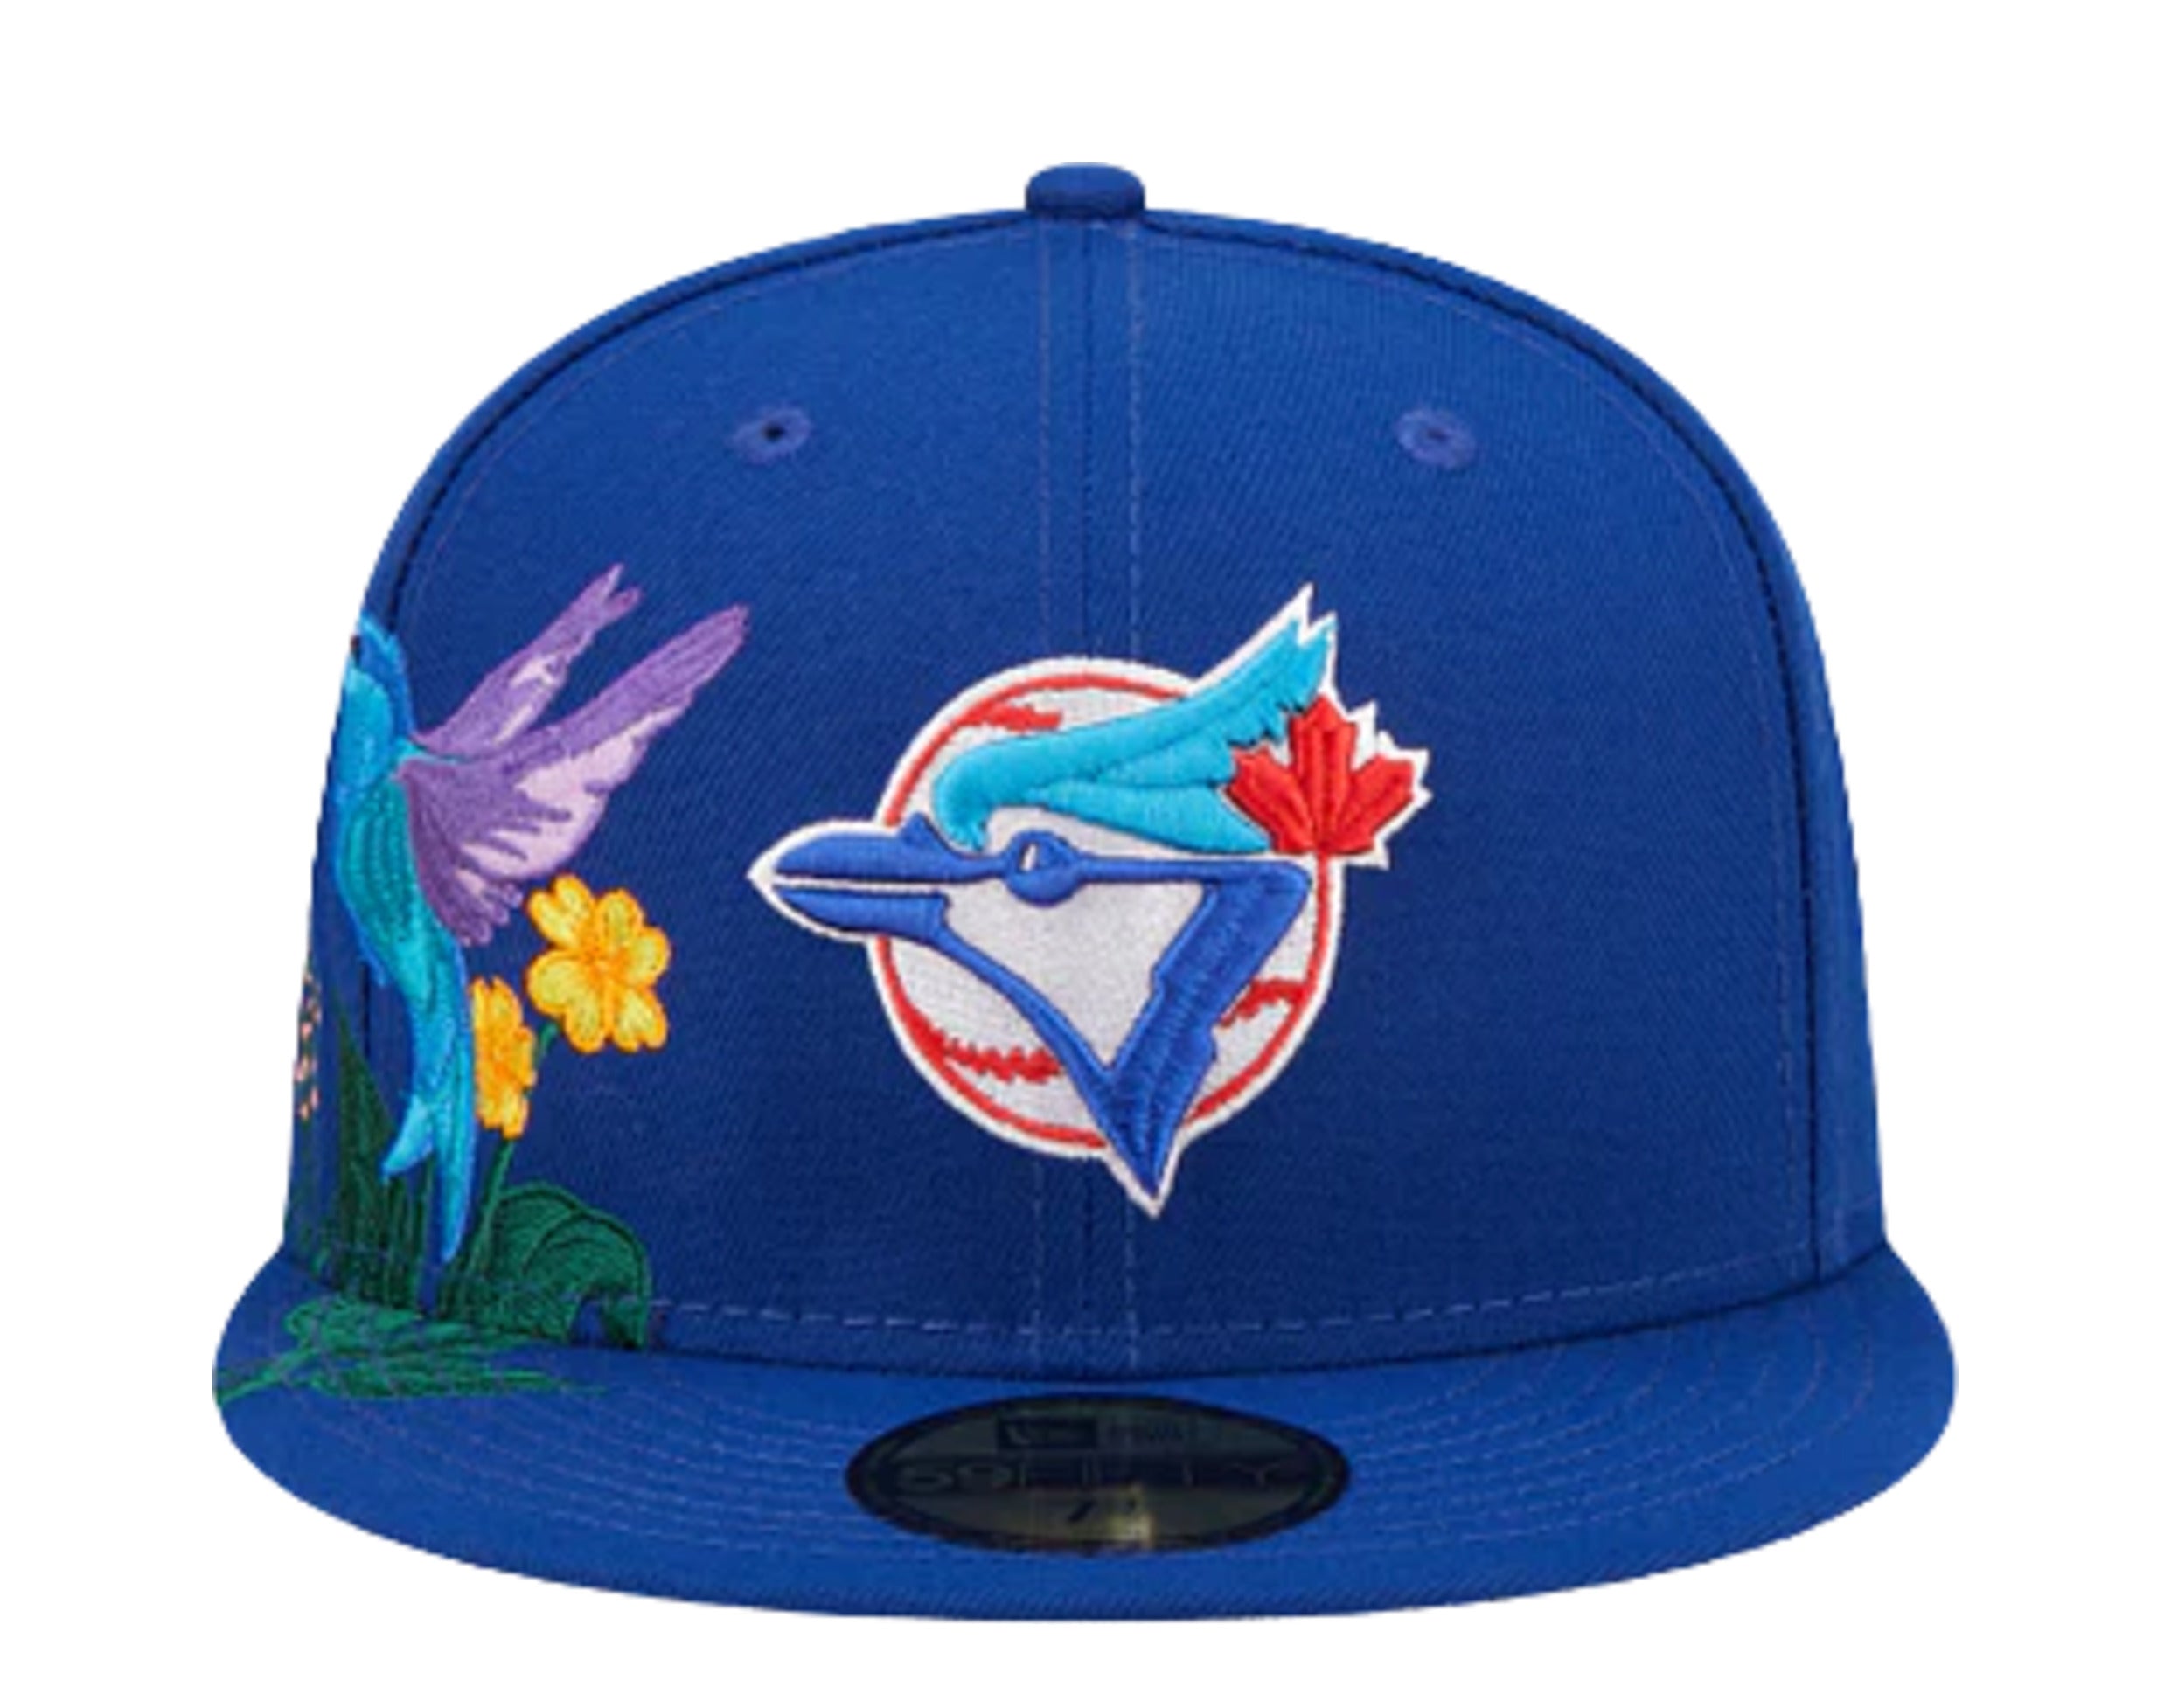 Lids Toronto Blue Jays New Era Turn Back the Clock 59FIFTY Fitted Hat -  Scarlet